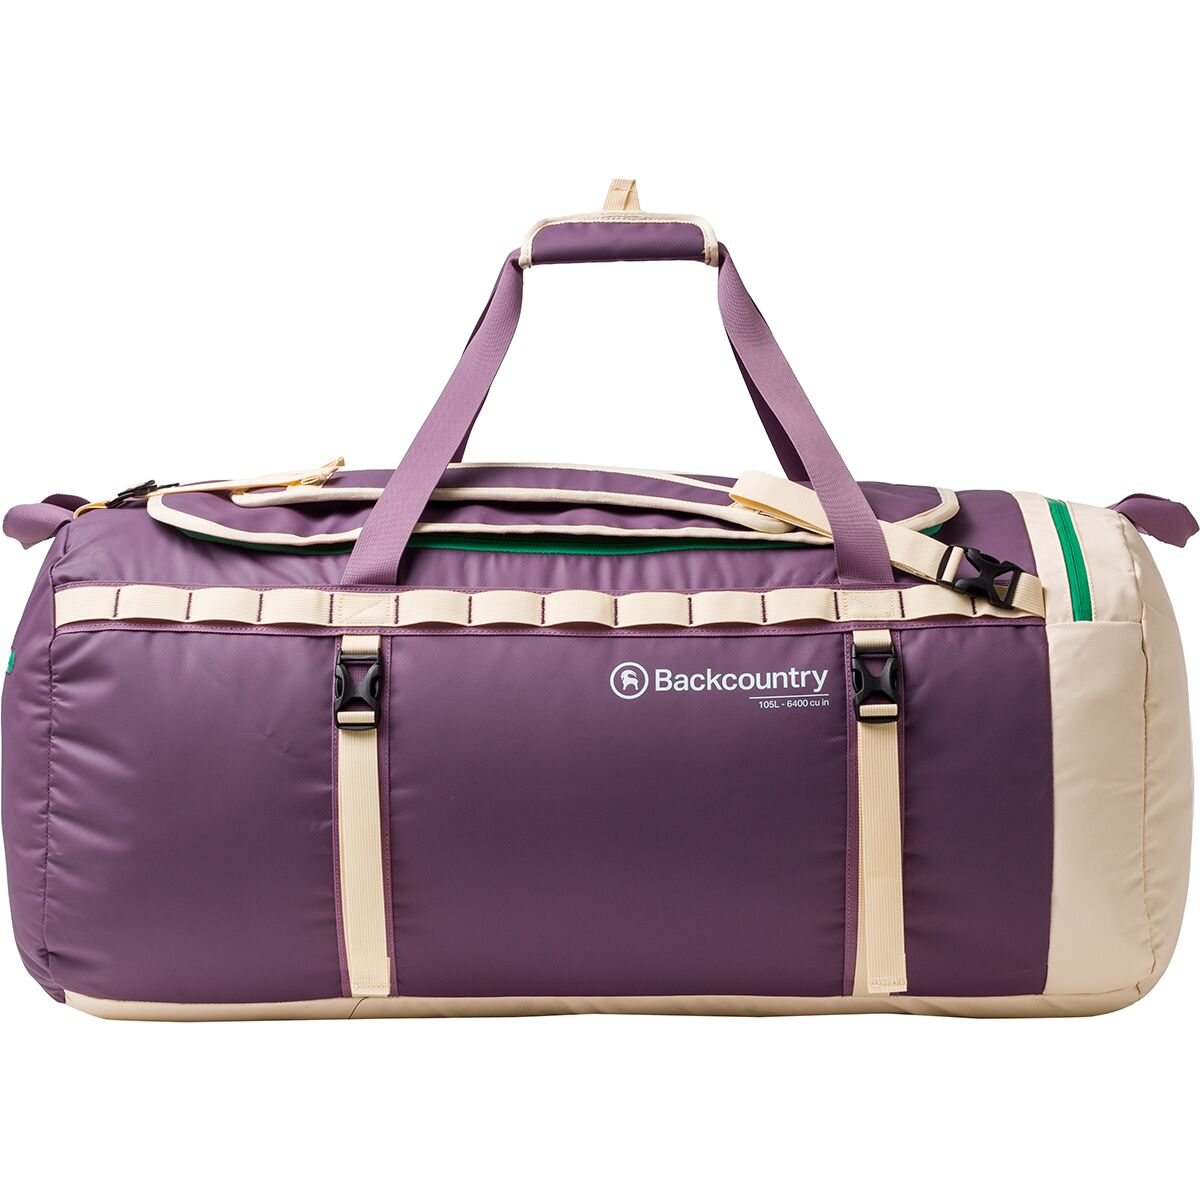 Backcountry All Around 105L Duffel Hortensia/Bleached Sand, One Size